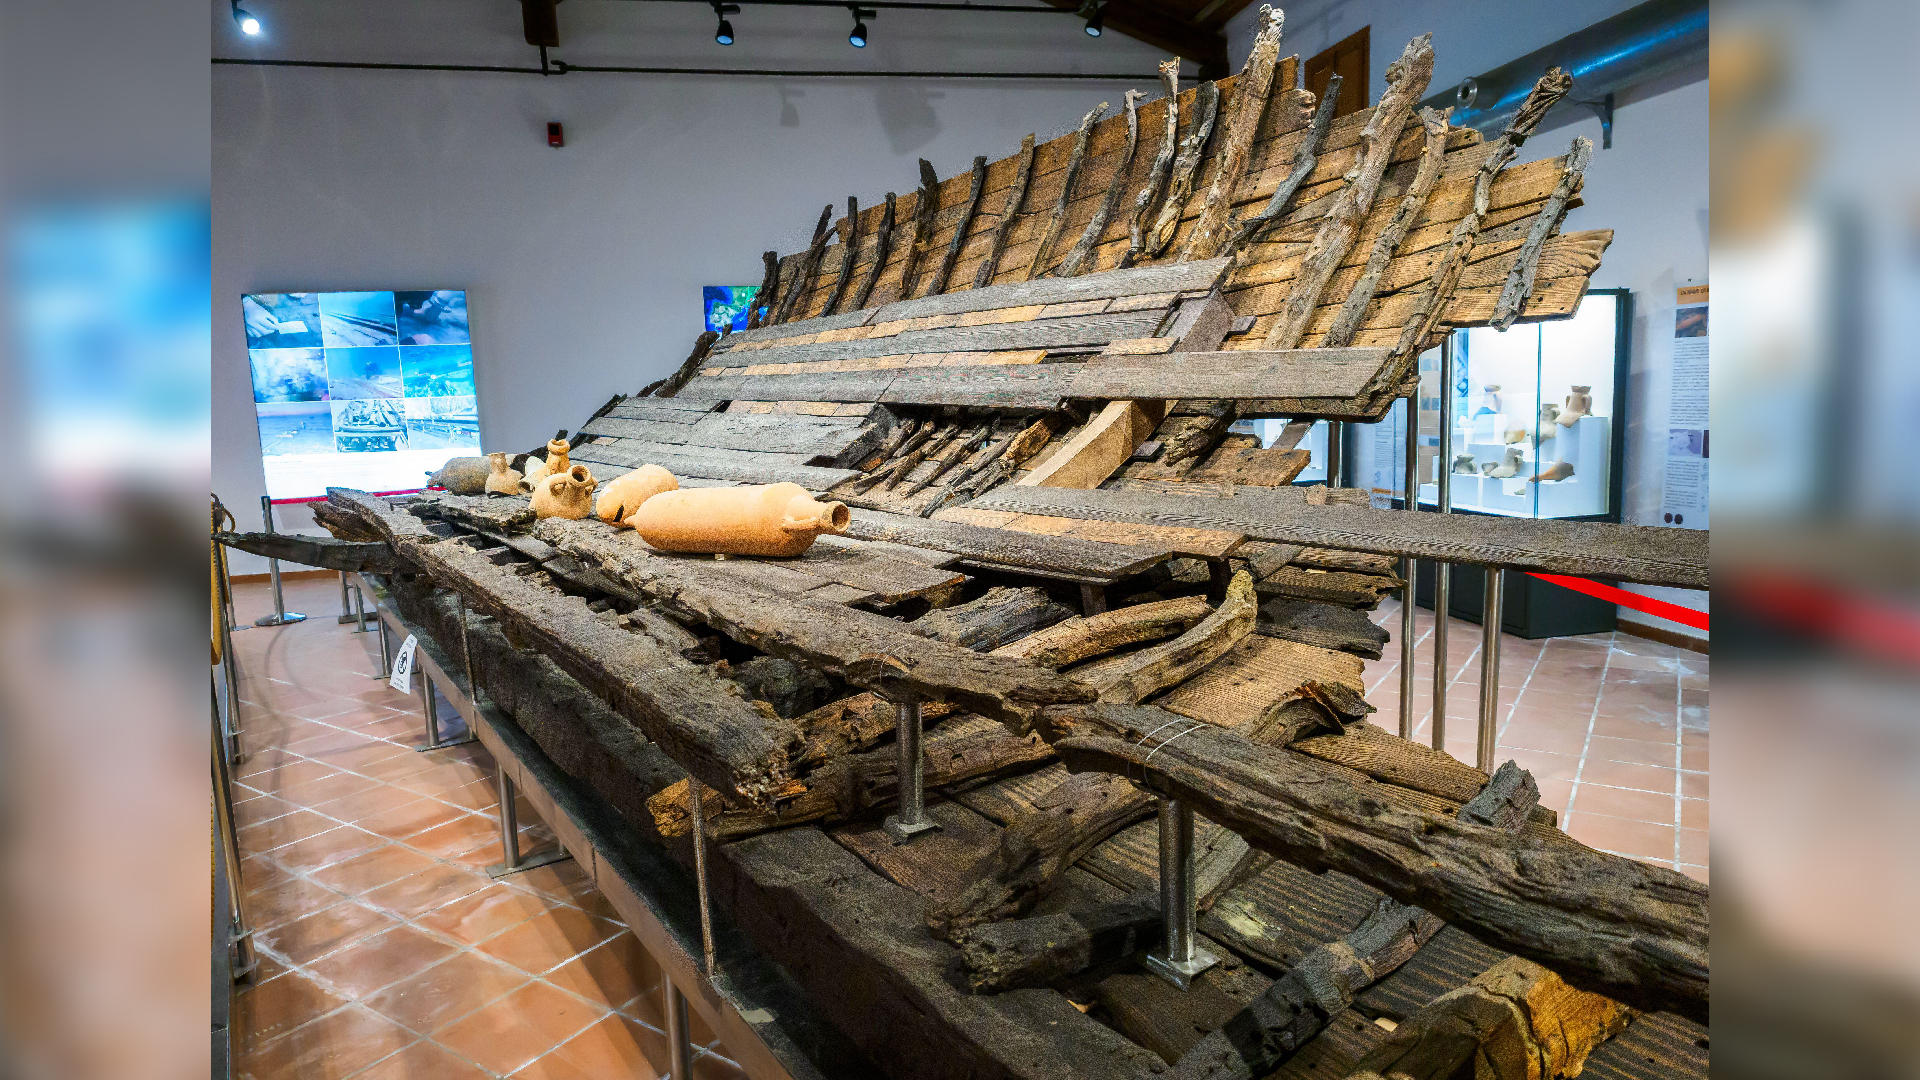 The marsala punic shipwreck displayed in a museum